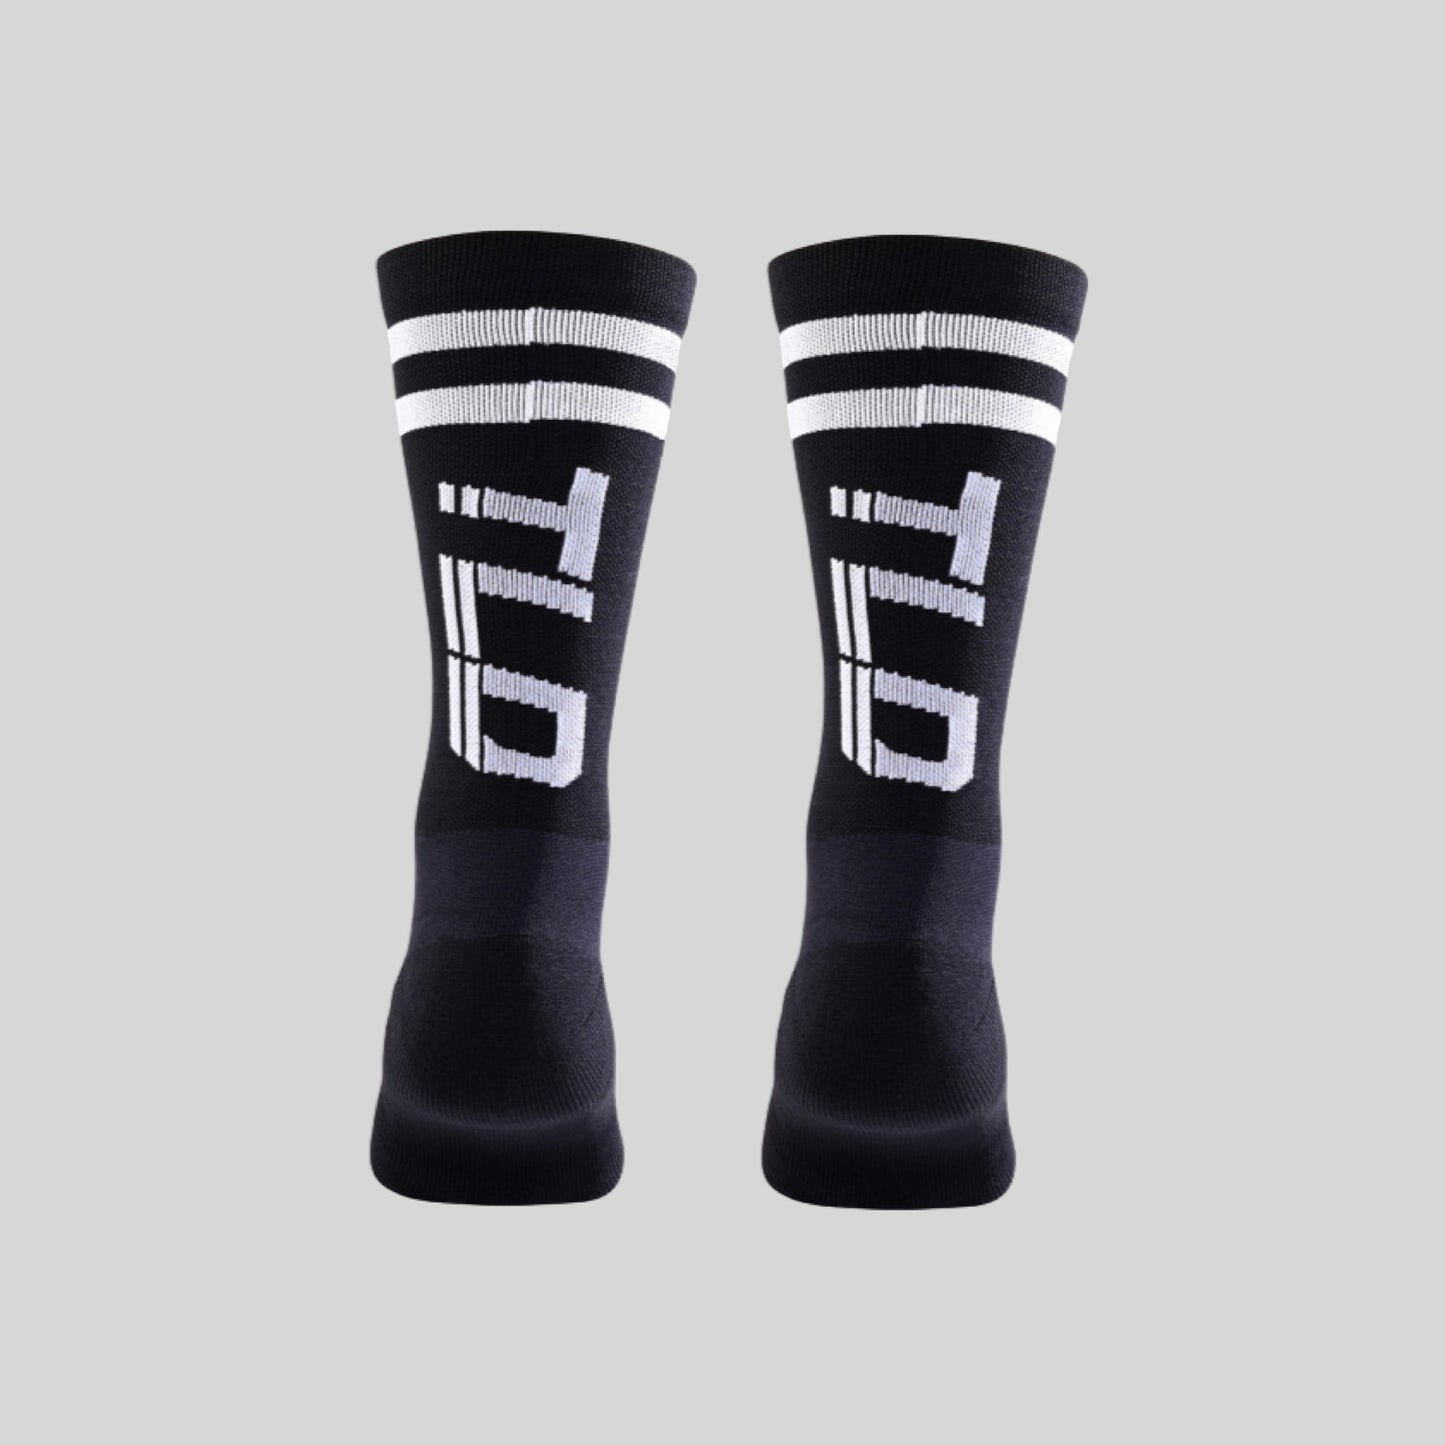 Troy Lee Designs Performance Speed Socks Black from Ascender Cycling Club Zürich Switzerland Back Side View